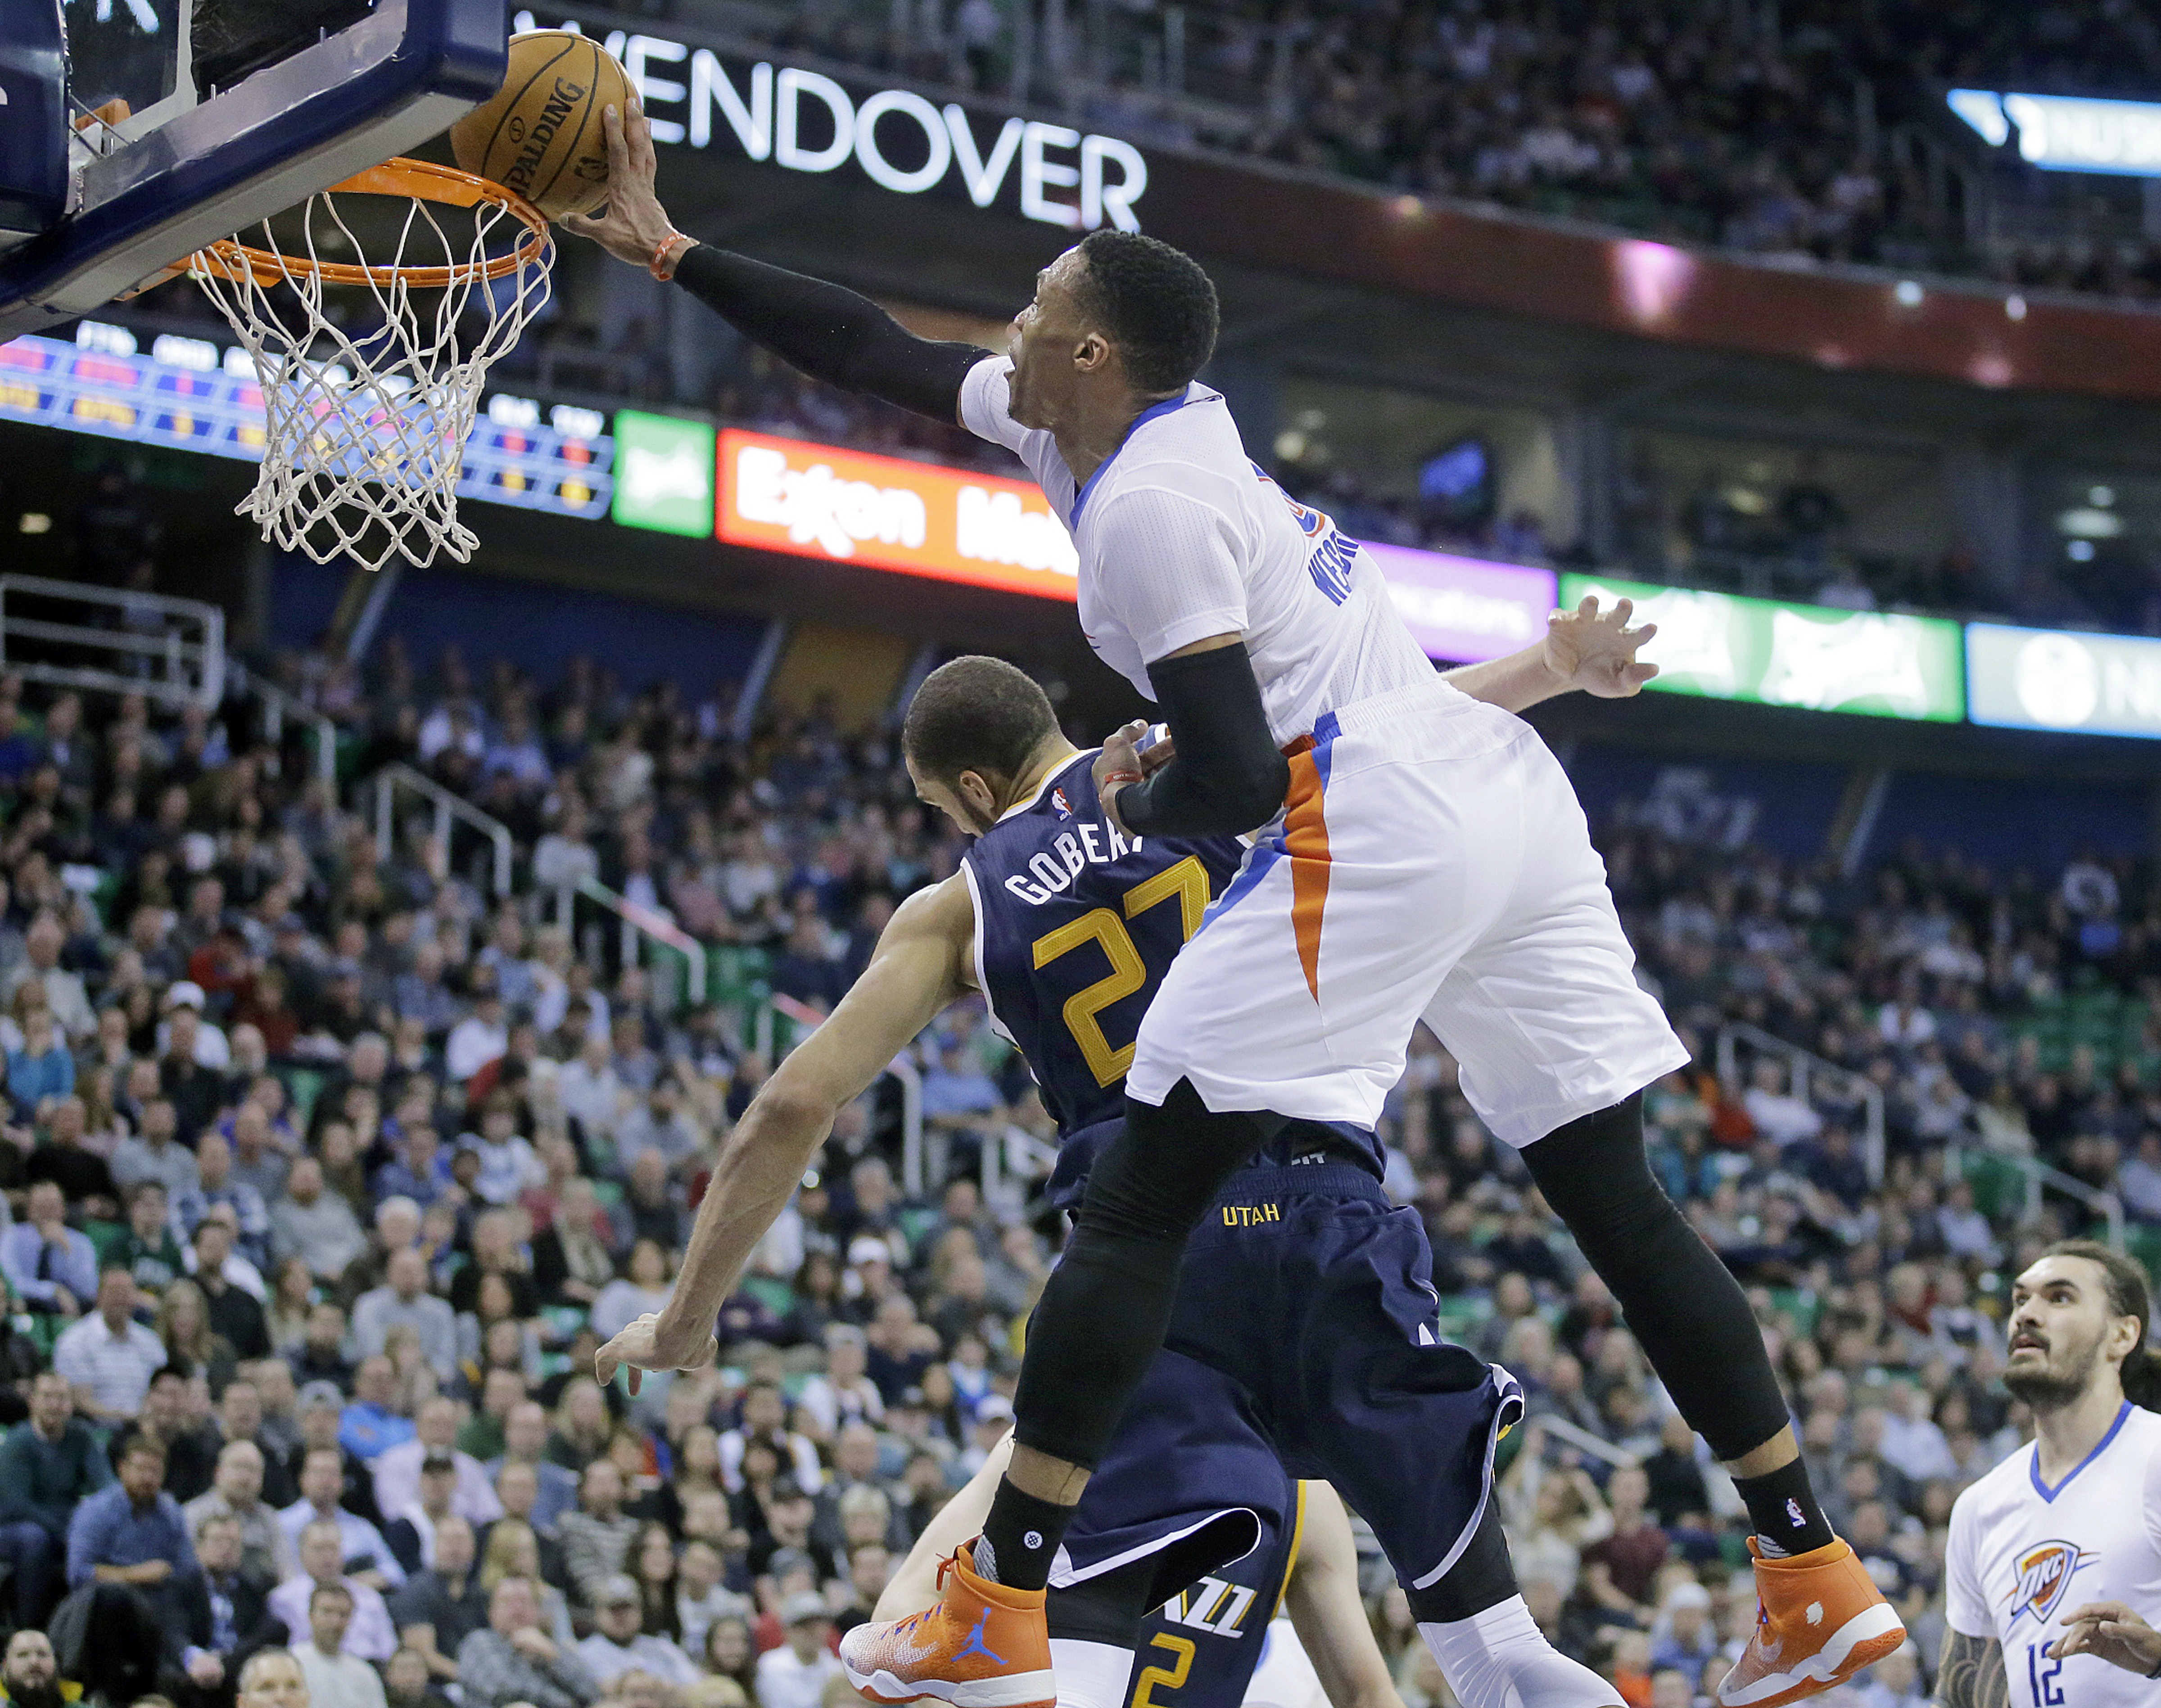 Oklahoma City Thunder guard Russell Westbrook (0) goes to the basket as Utah Jazz center Rudy Gobert (27) defends in the second quarter during a NBA basketball game Monday, Jan. 23, 2017, in Salt Lake City. (AP Photo/Rick Bowmer)